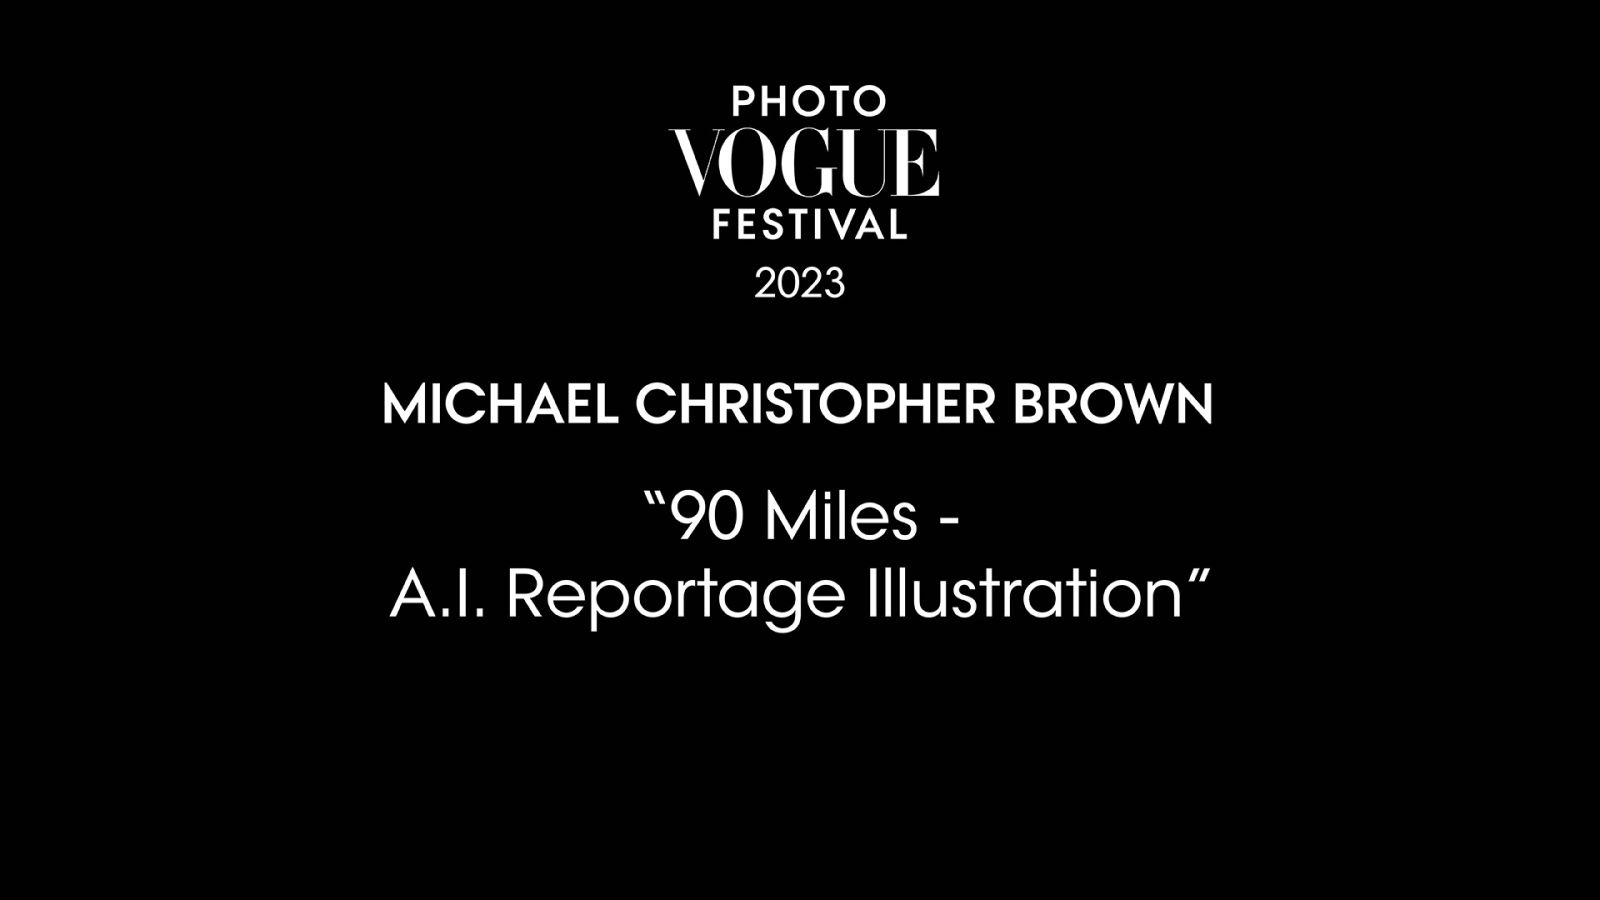 90 Miles - A.I. Reportage Illustration | PhotoVogue Festival 2023: What Makes Us Human? Image in the Age of A.I.